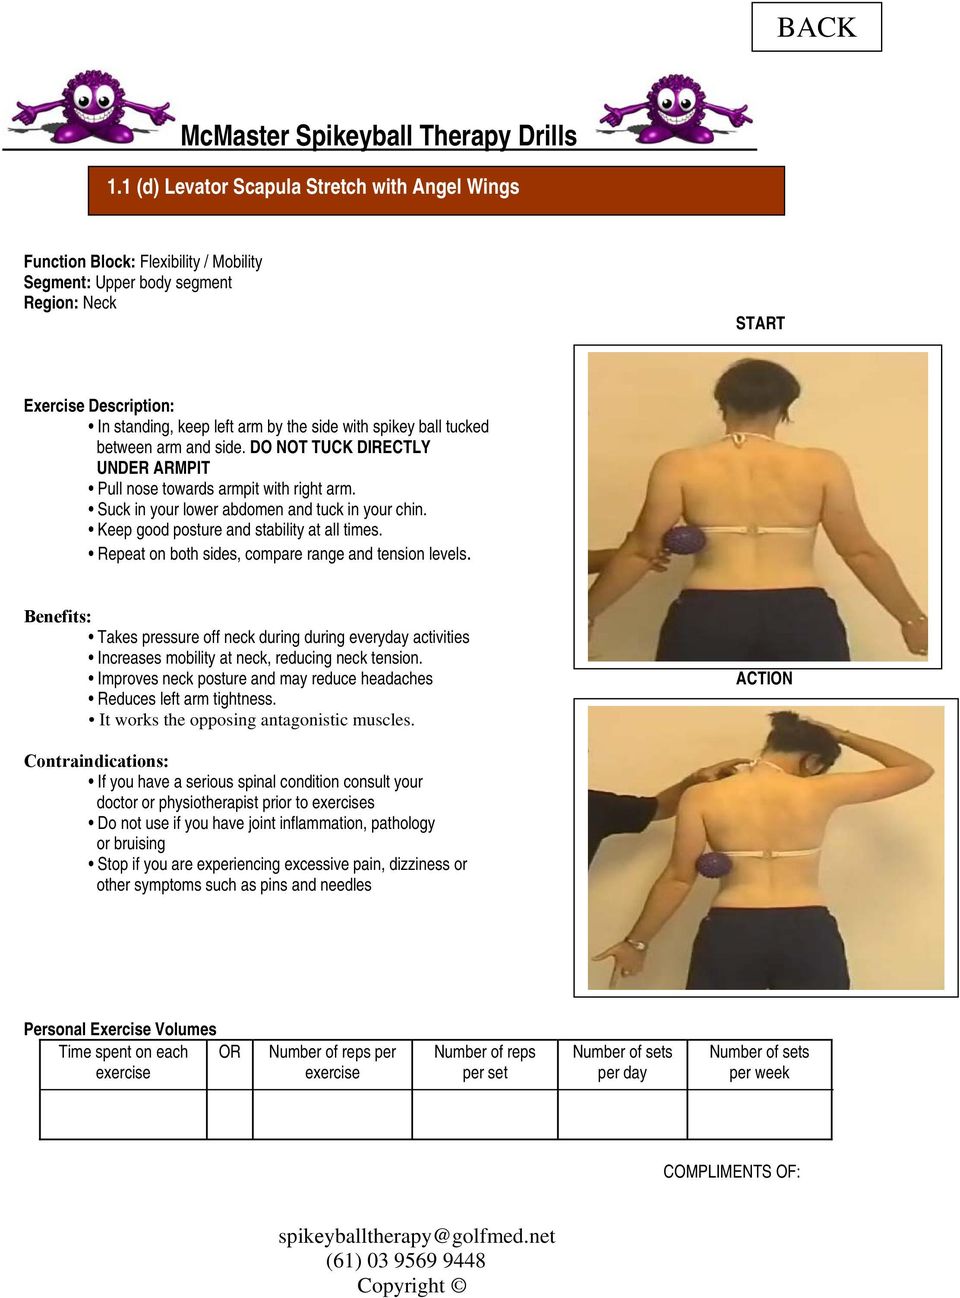 Keep good posture and stability at all times. Repeat on both sides, compare range and tension levels.